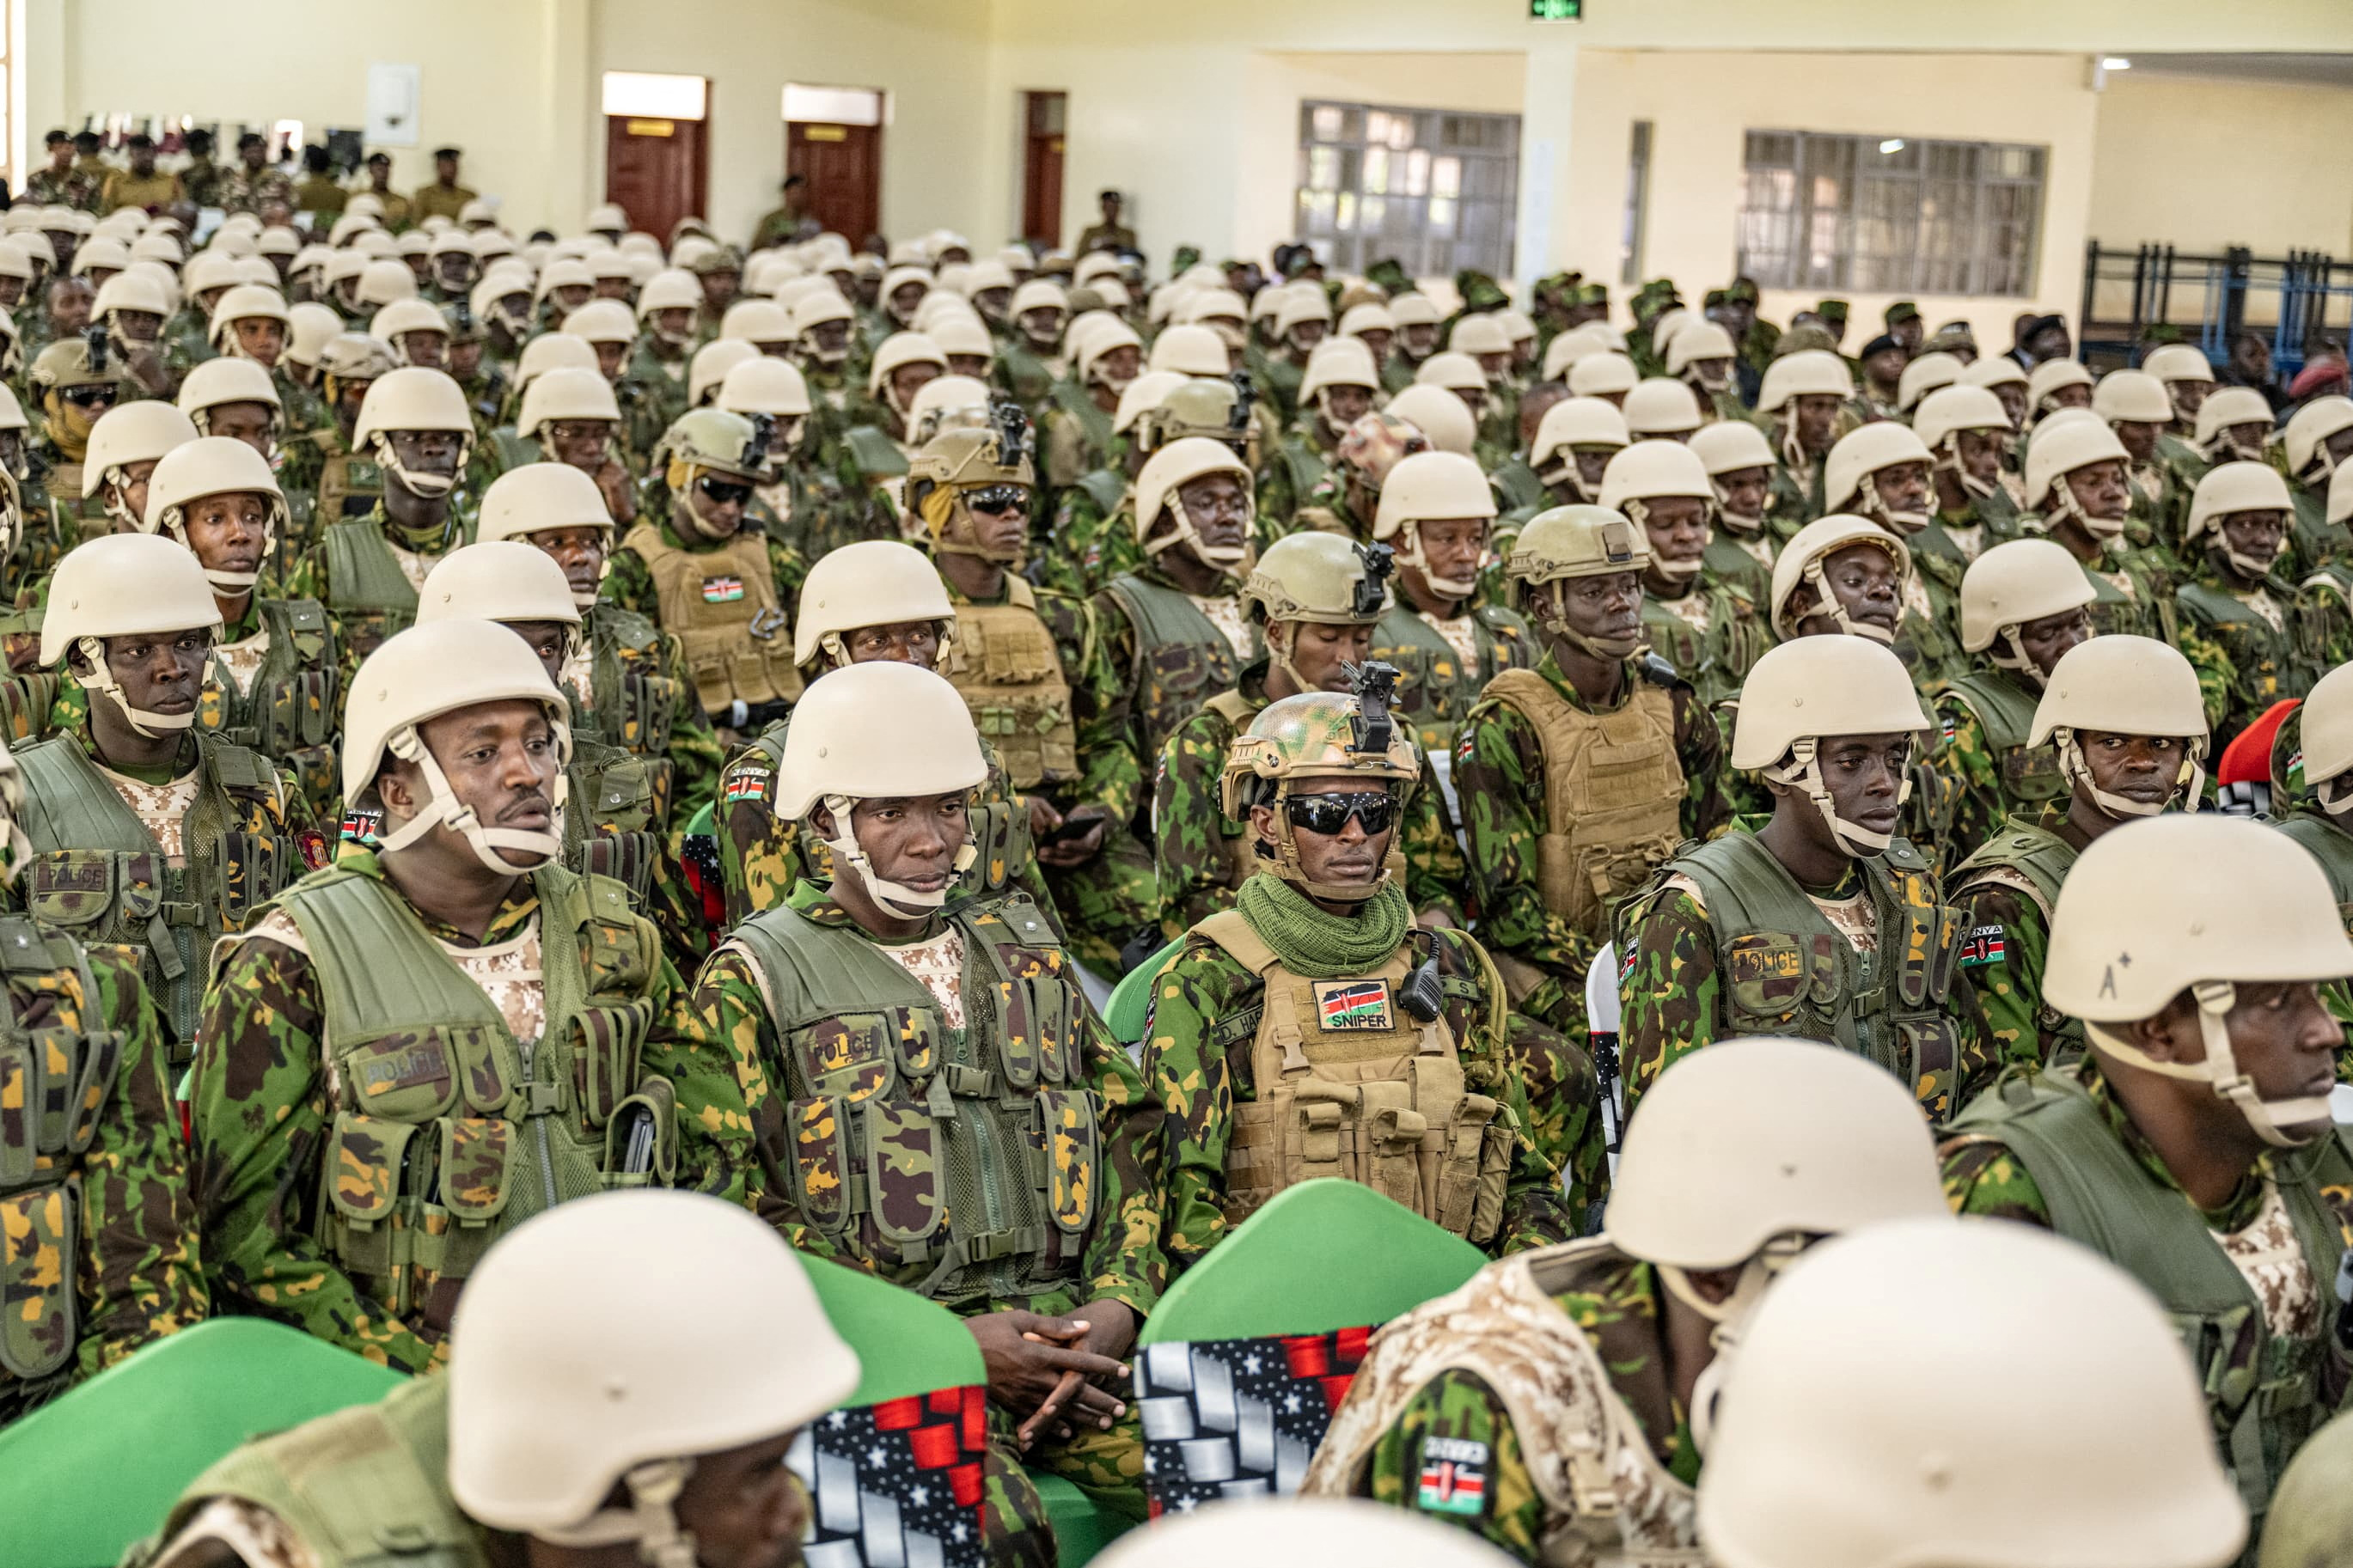 Pre-departure briefing for the first contingent of police officers to deploy to Haiti, at Embakasi, Nairobi